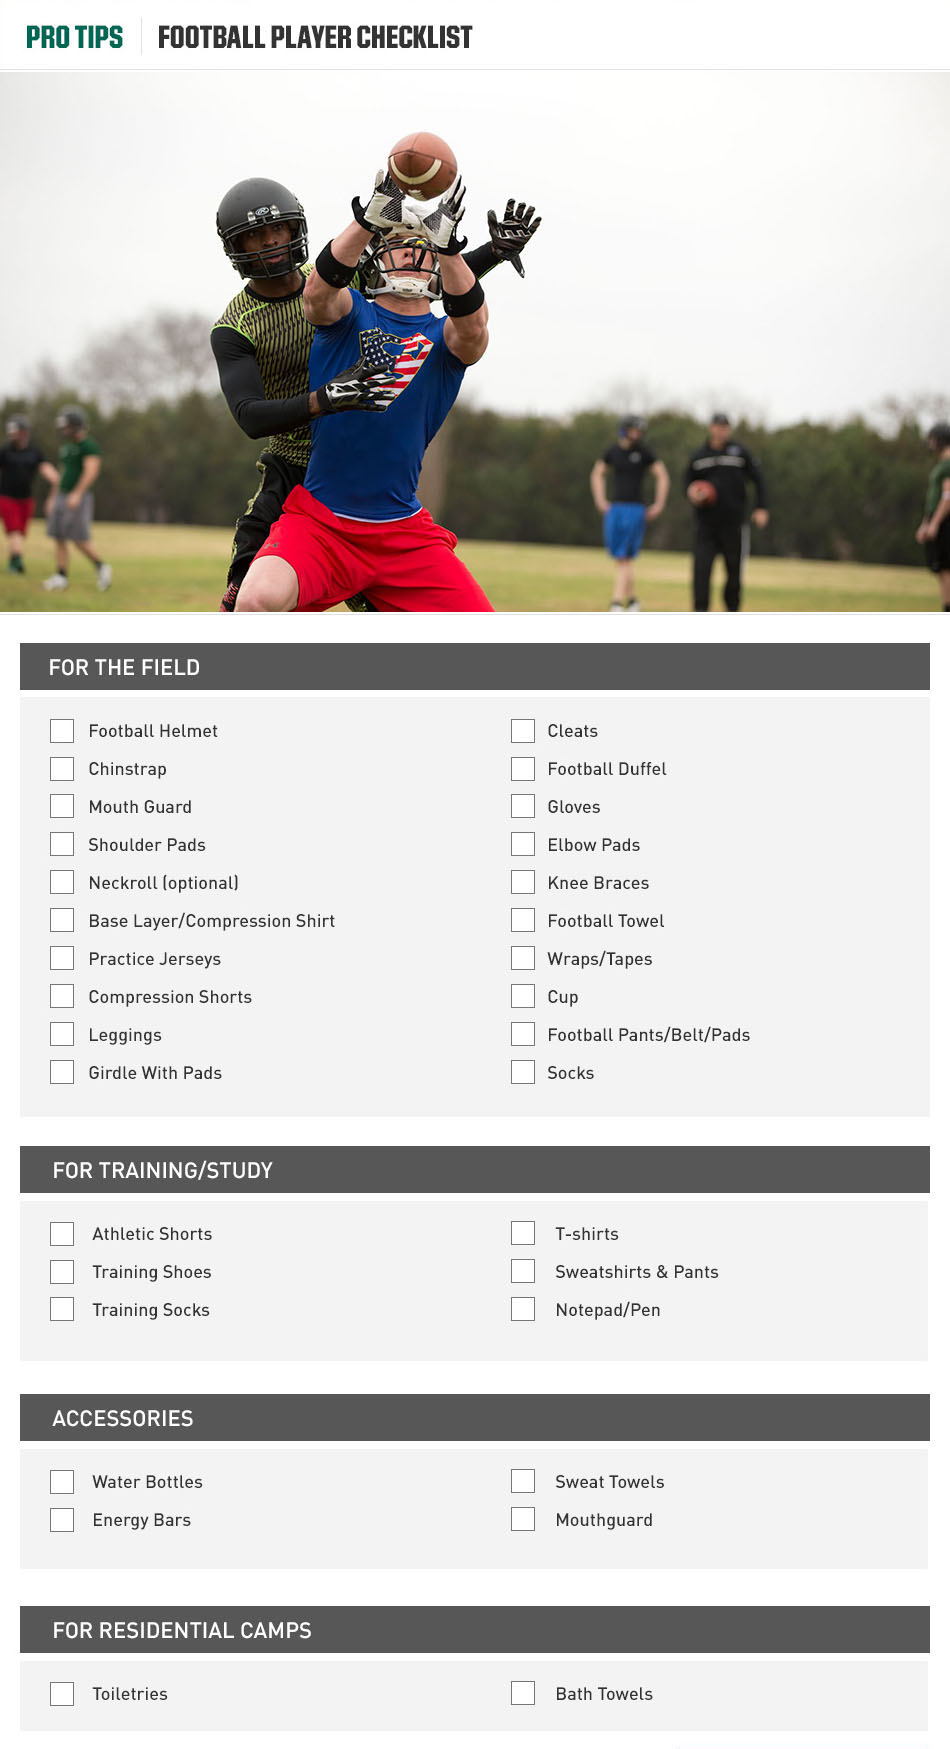 Checklist For Football Camp Pro Tips By Dick S Sporting Goods